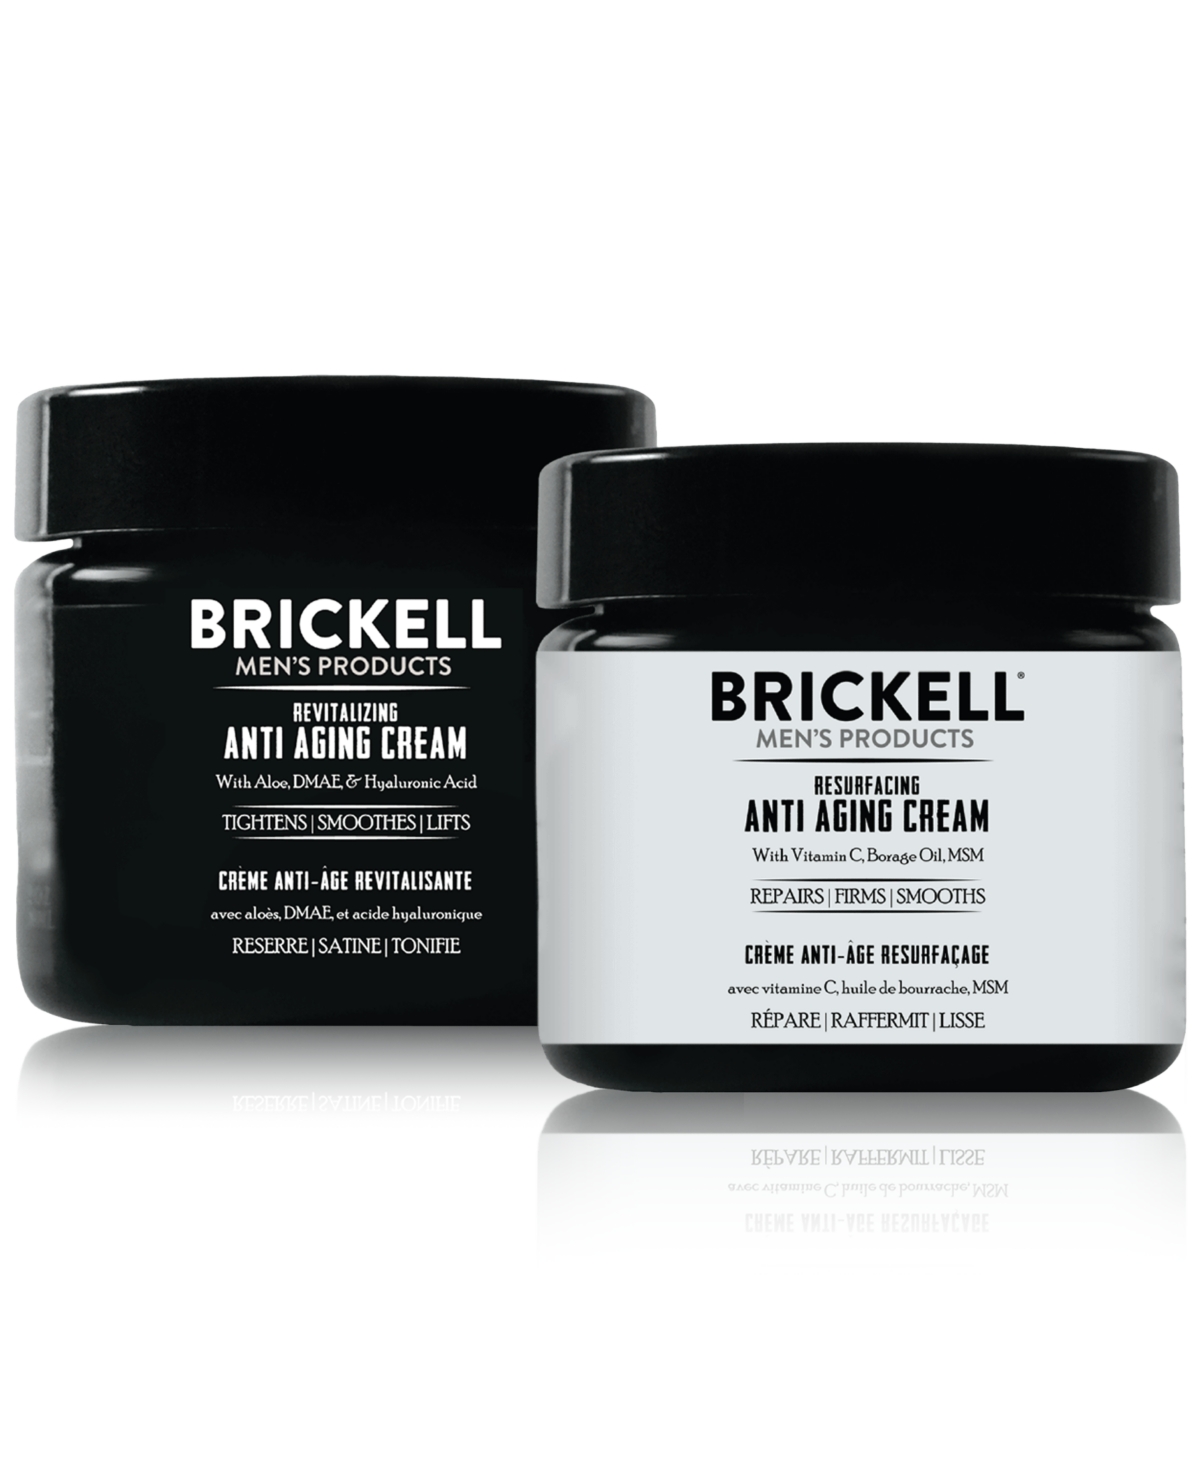 Brickell Mens Products Brickell Men's Products 2-pc. Day & Night Cream Set